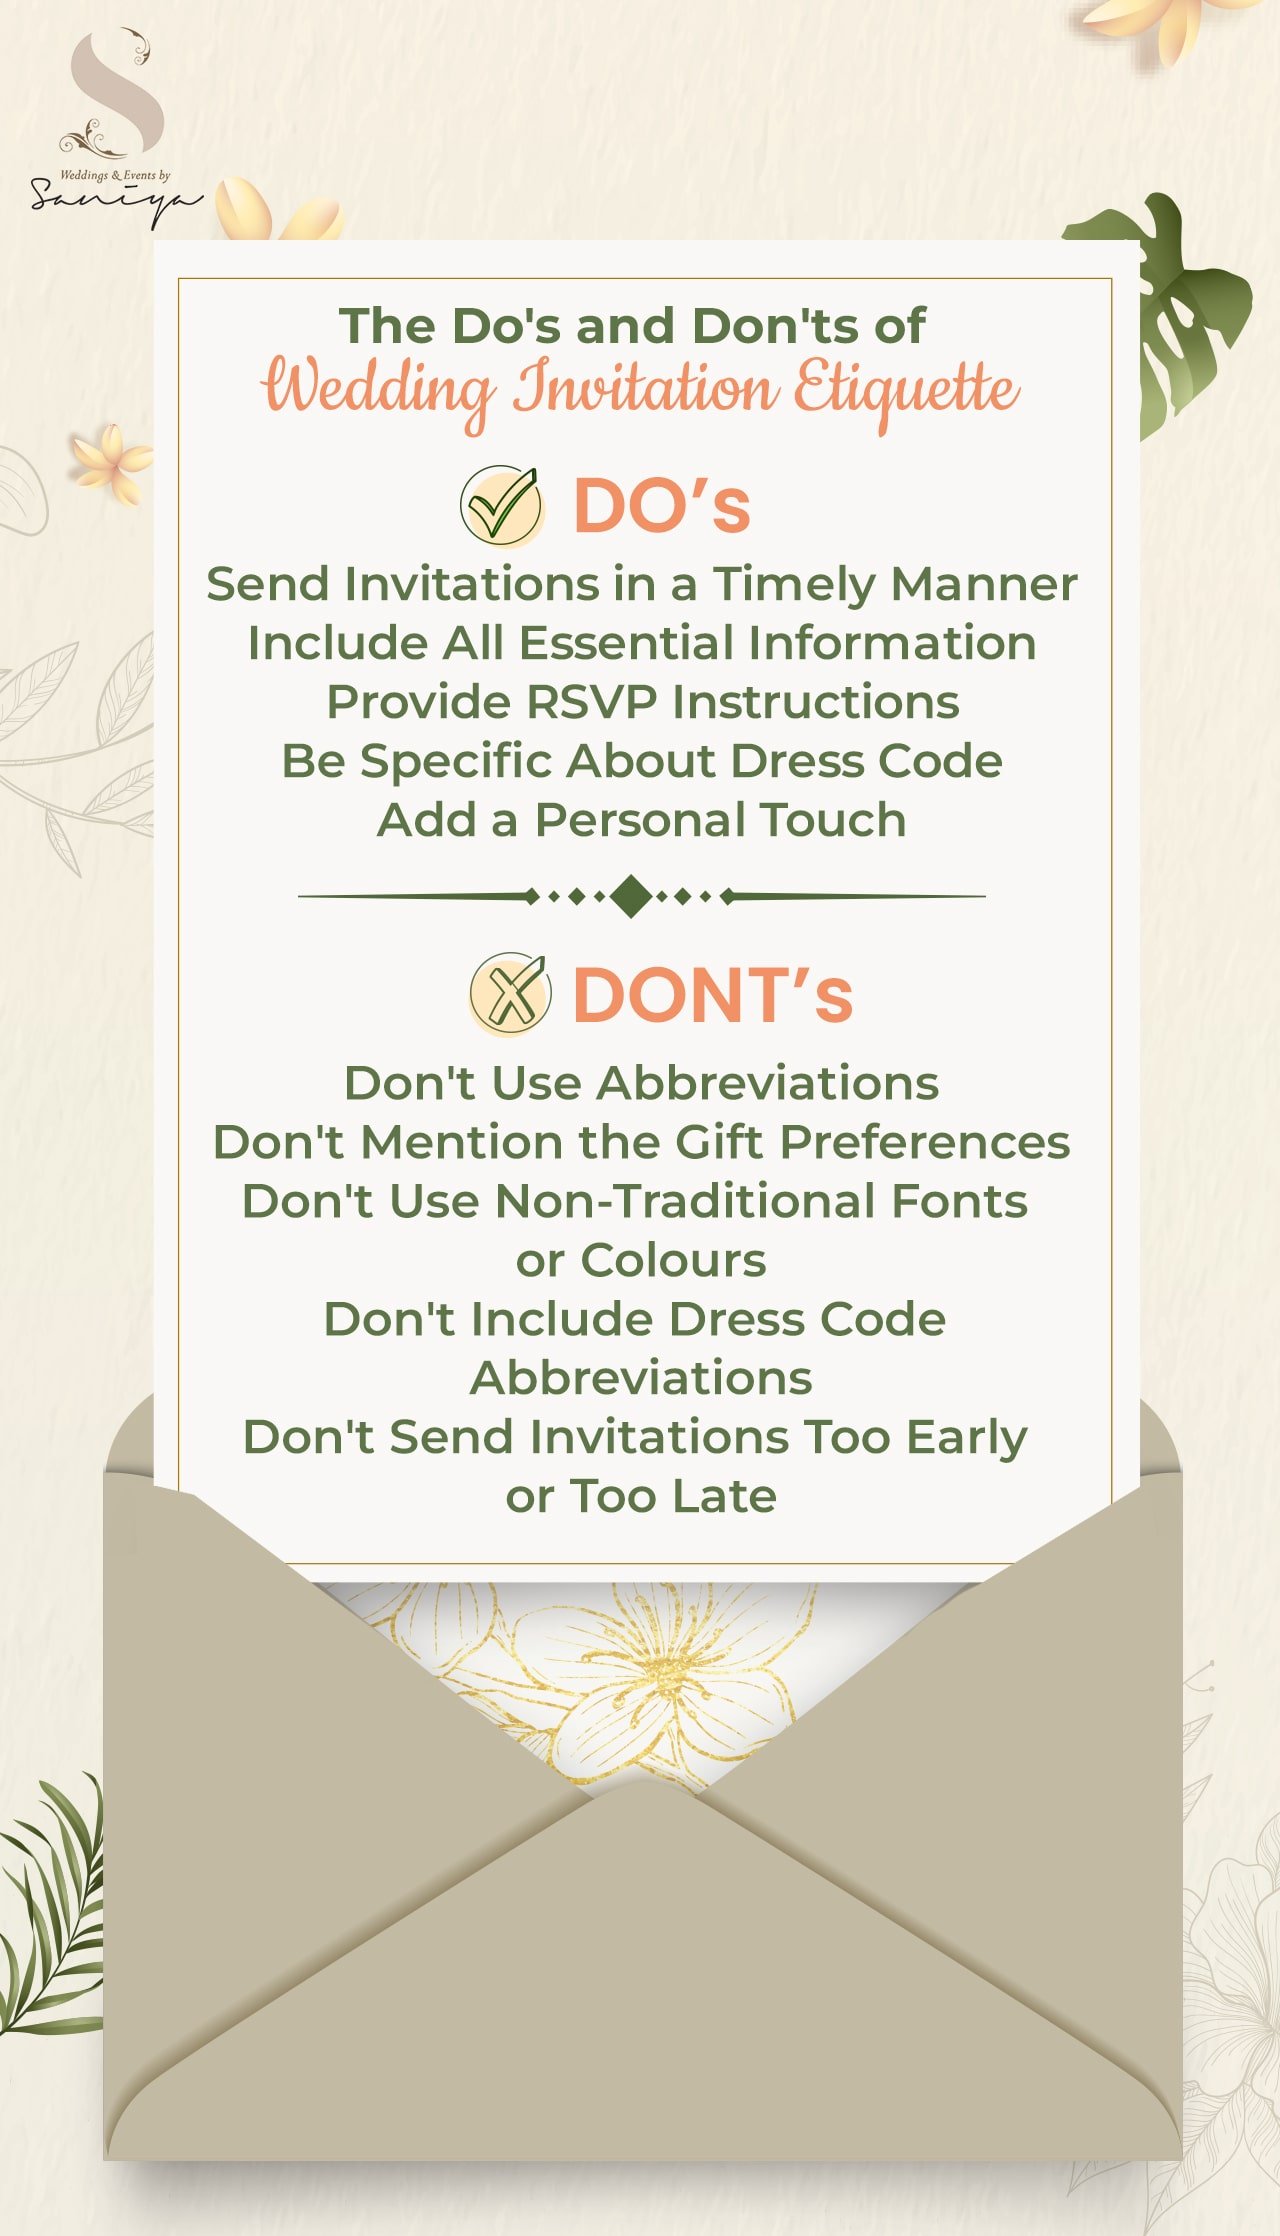 Do's and Don't of Wedding Invitation Etiquettes